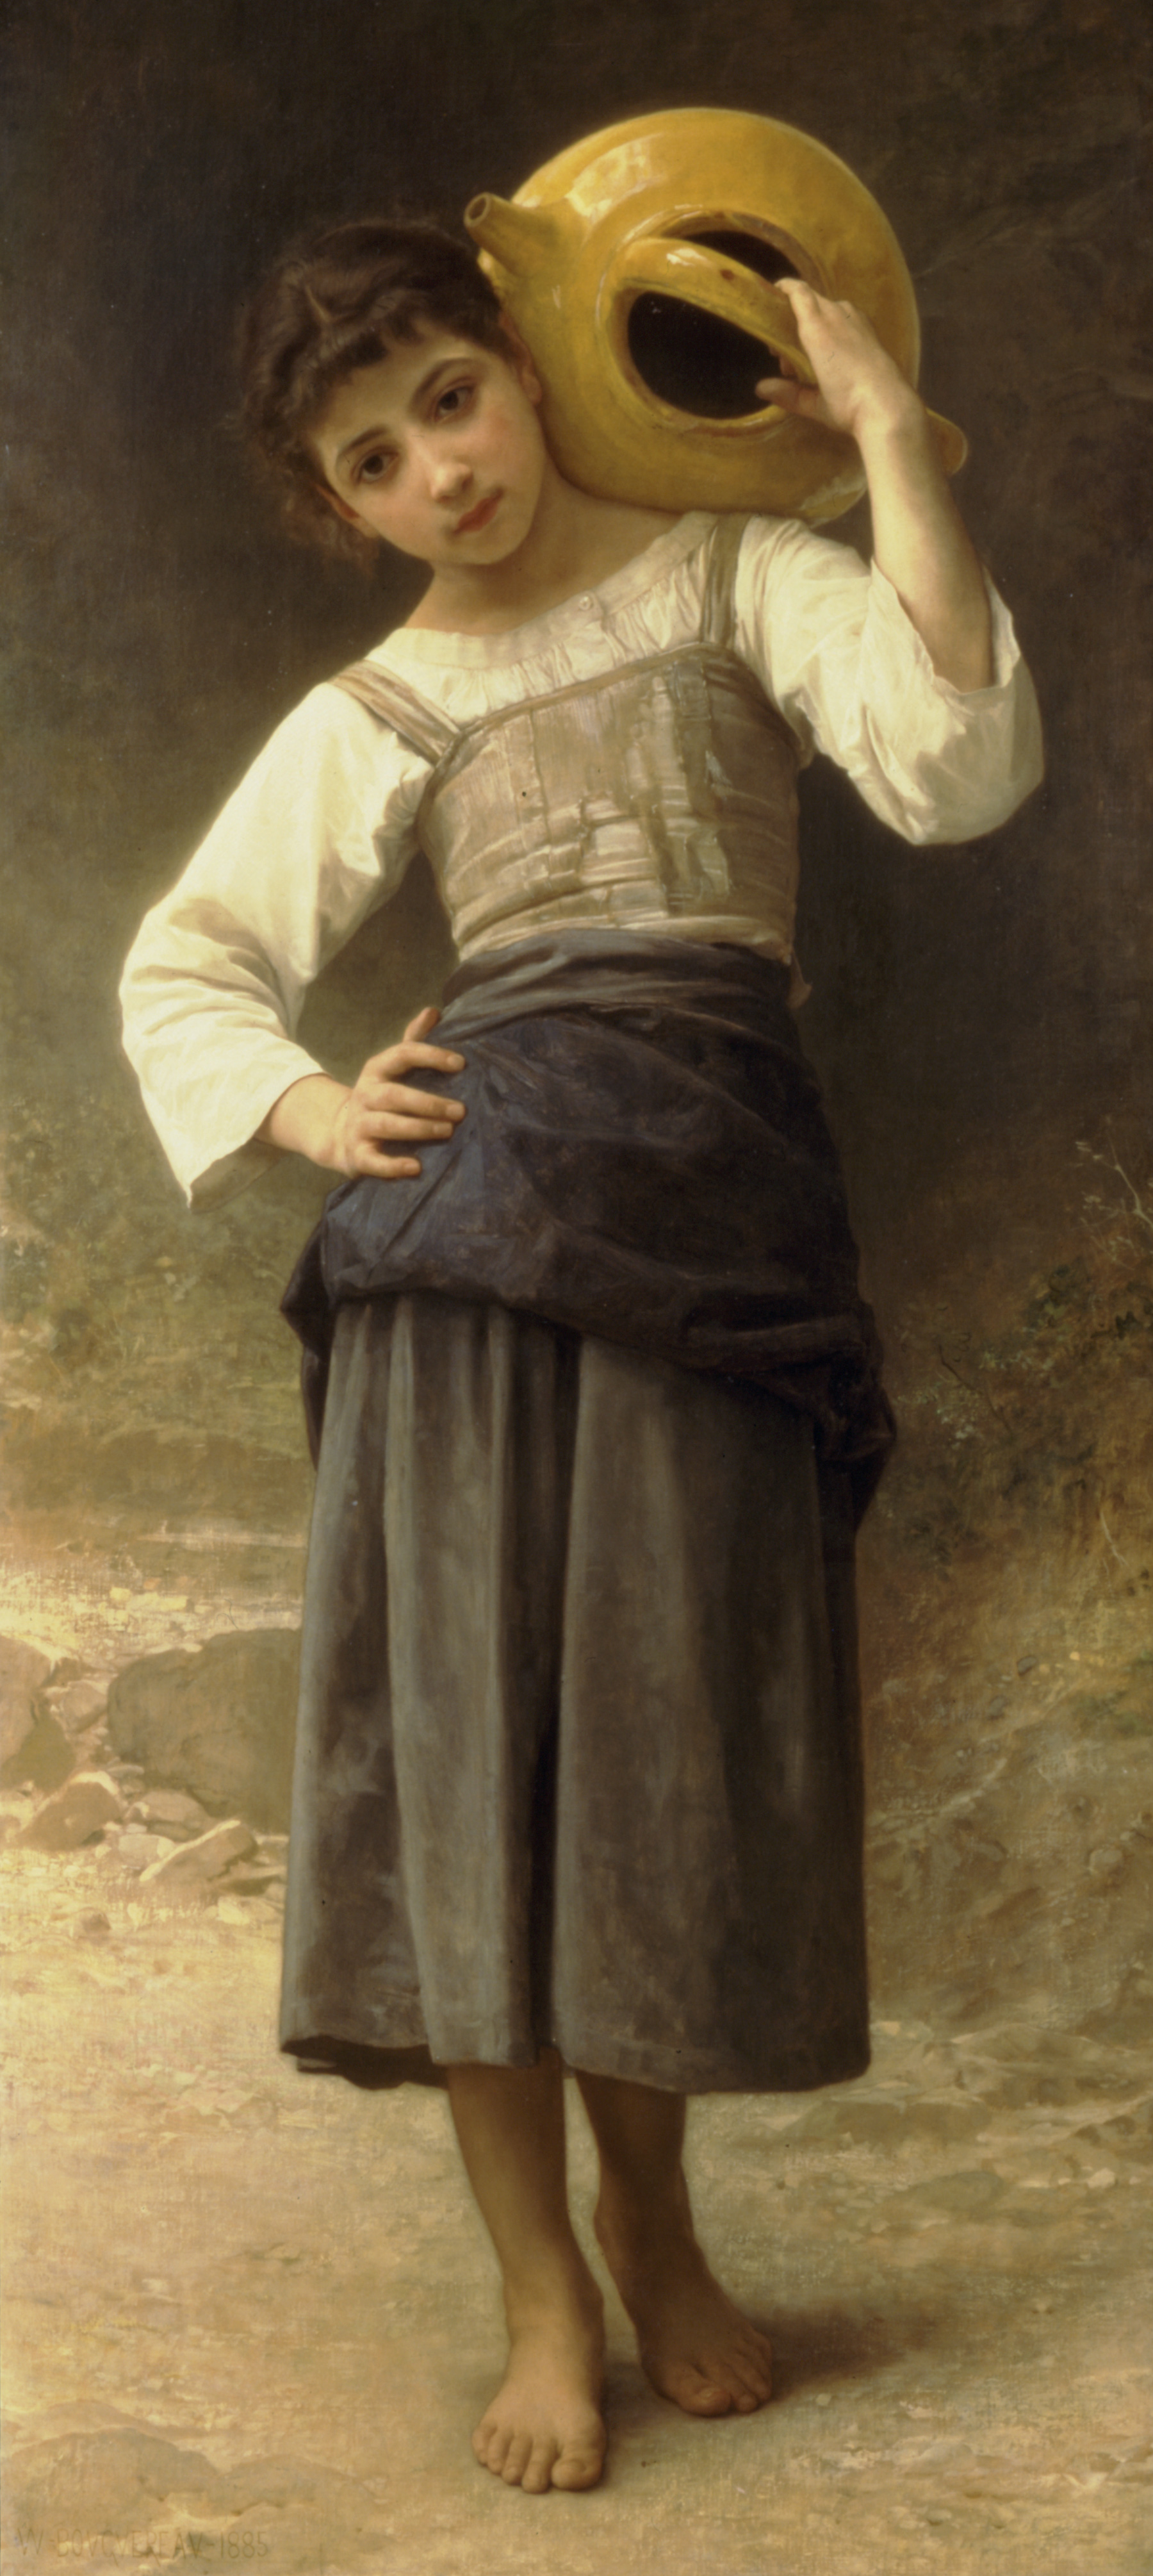 The Water Girl (Young Girl Going to the Spring) (1885).